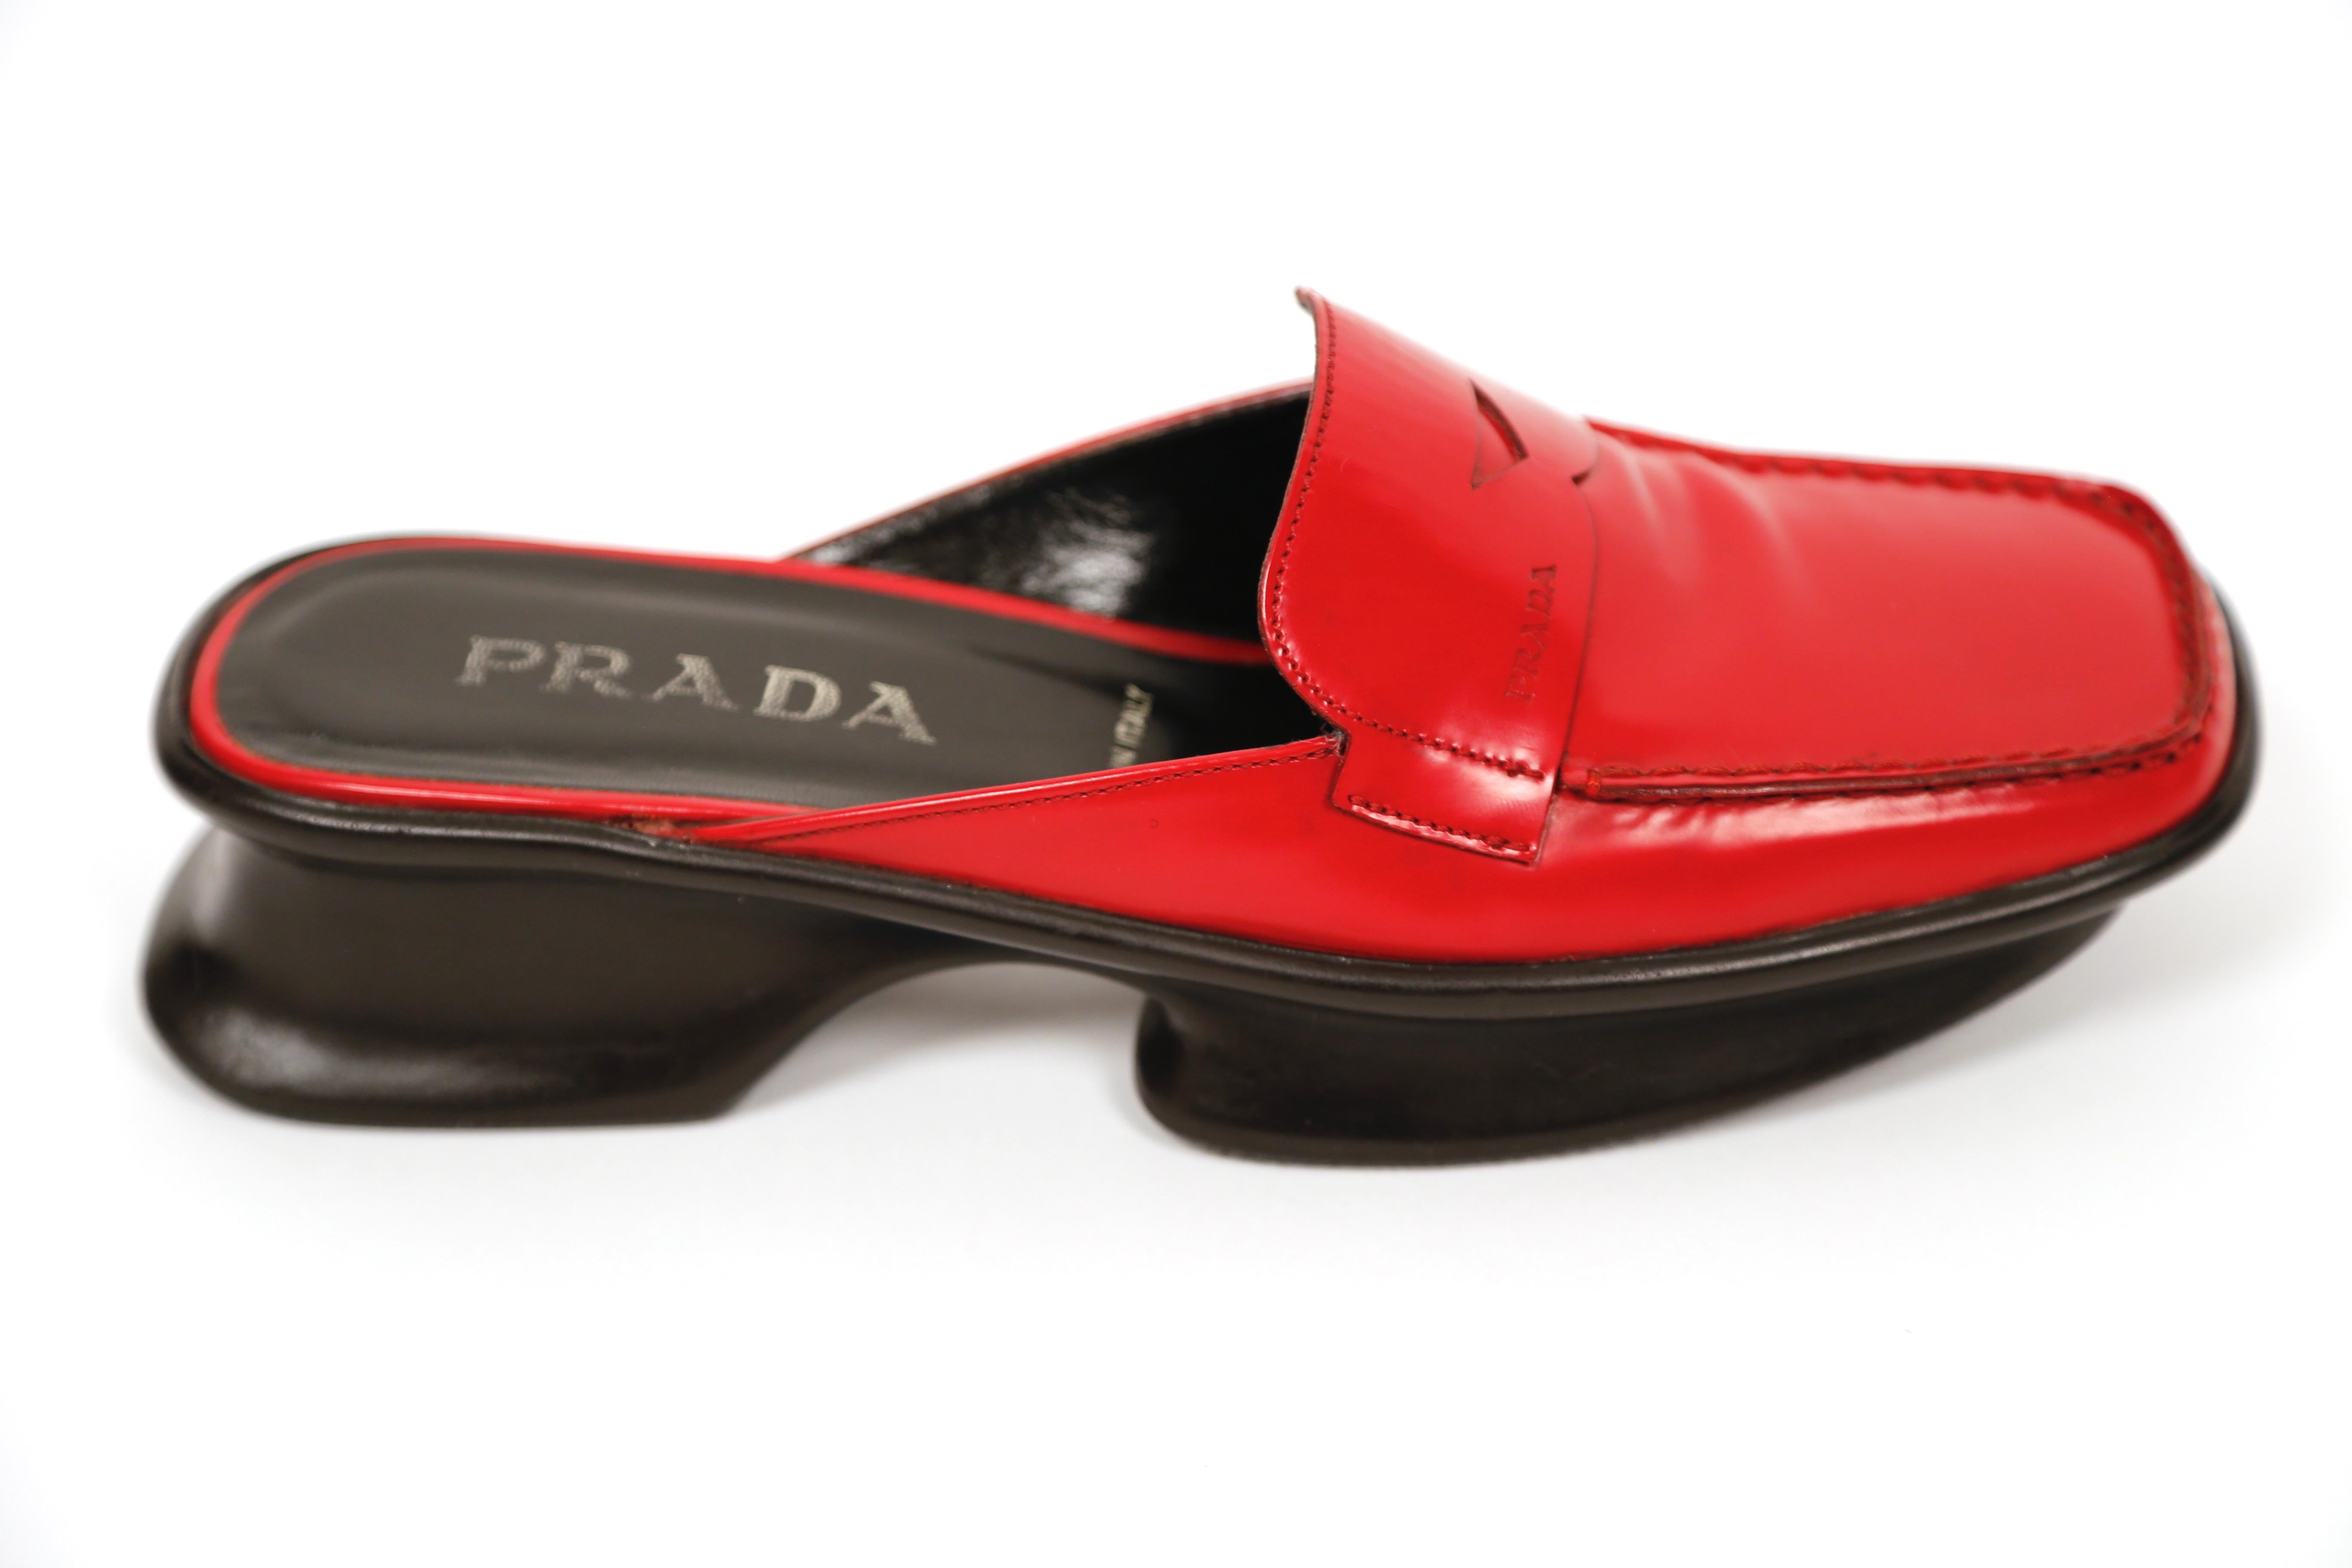 Red, polished-leather, platform loafers with split soles from Prada dating to spring of 1999. Labeled a size 36.5. Slide on. Made in Italy. Very good condition.